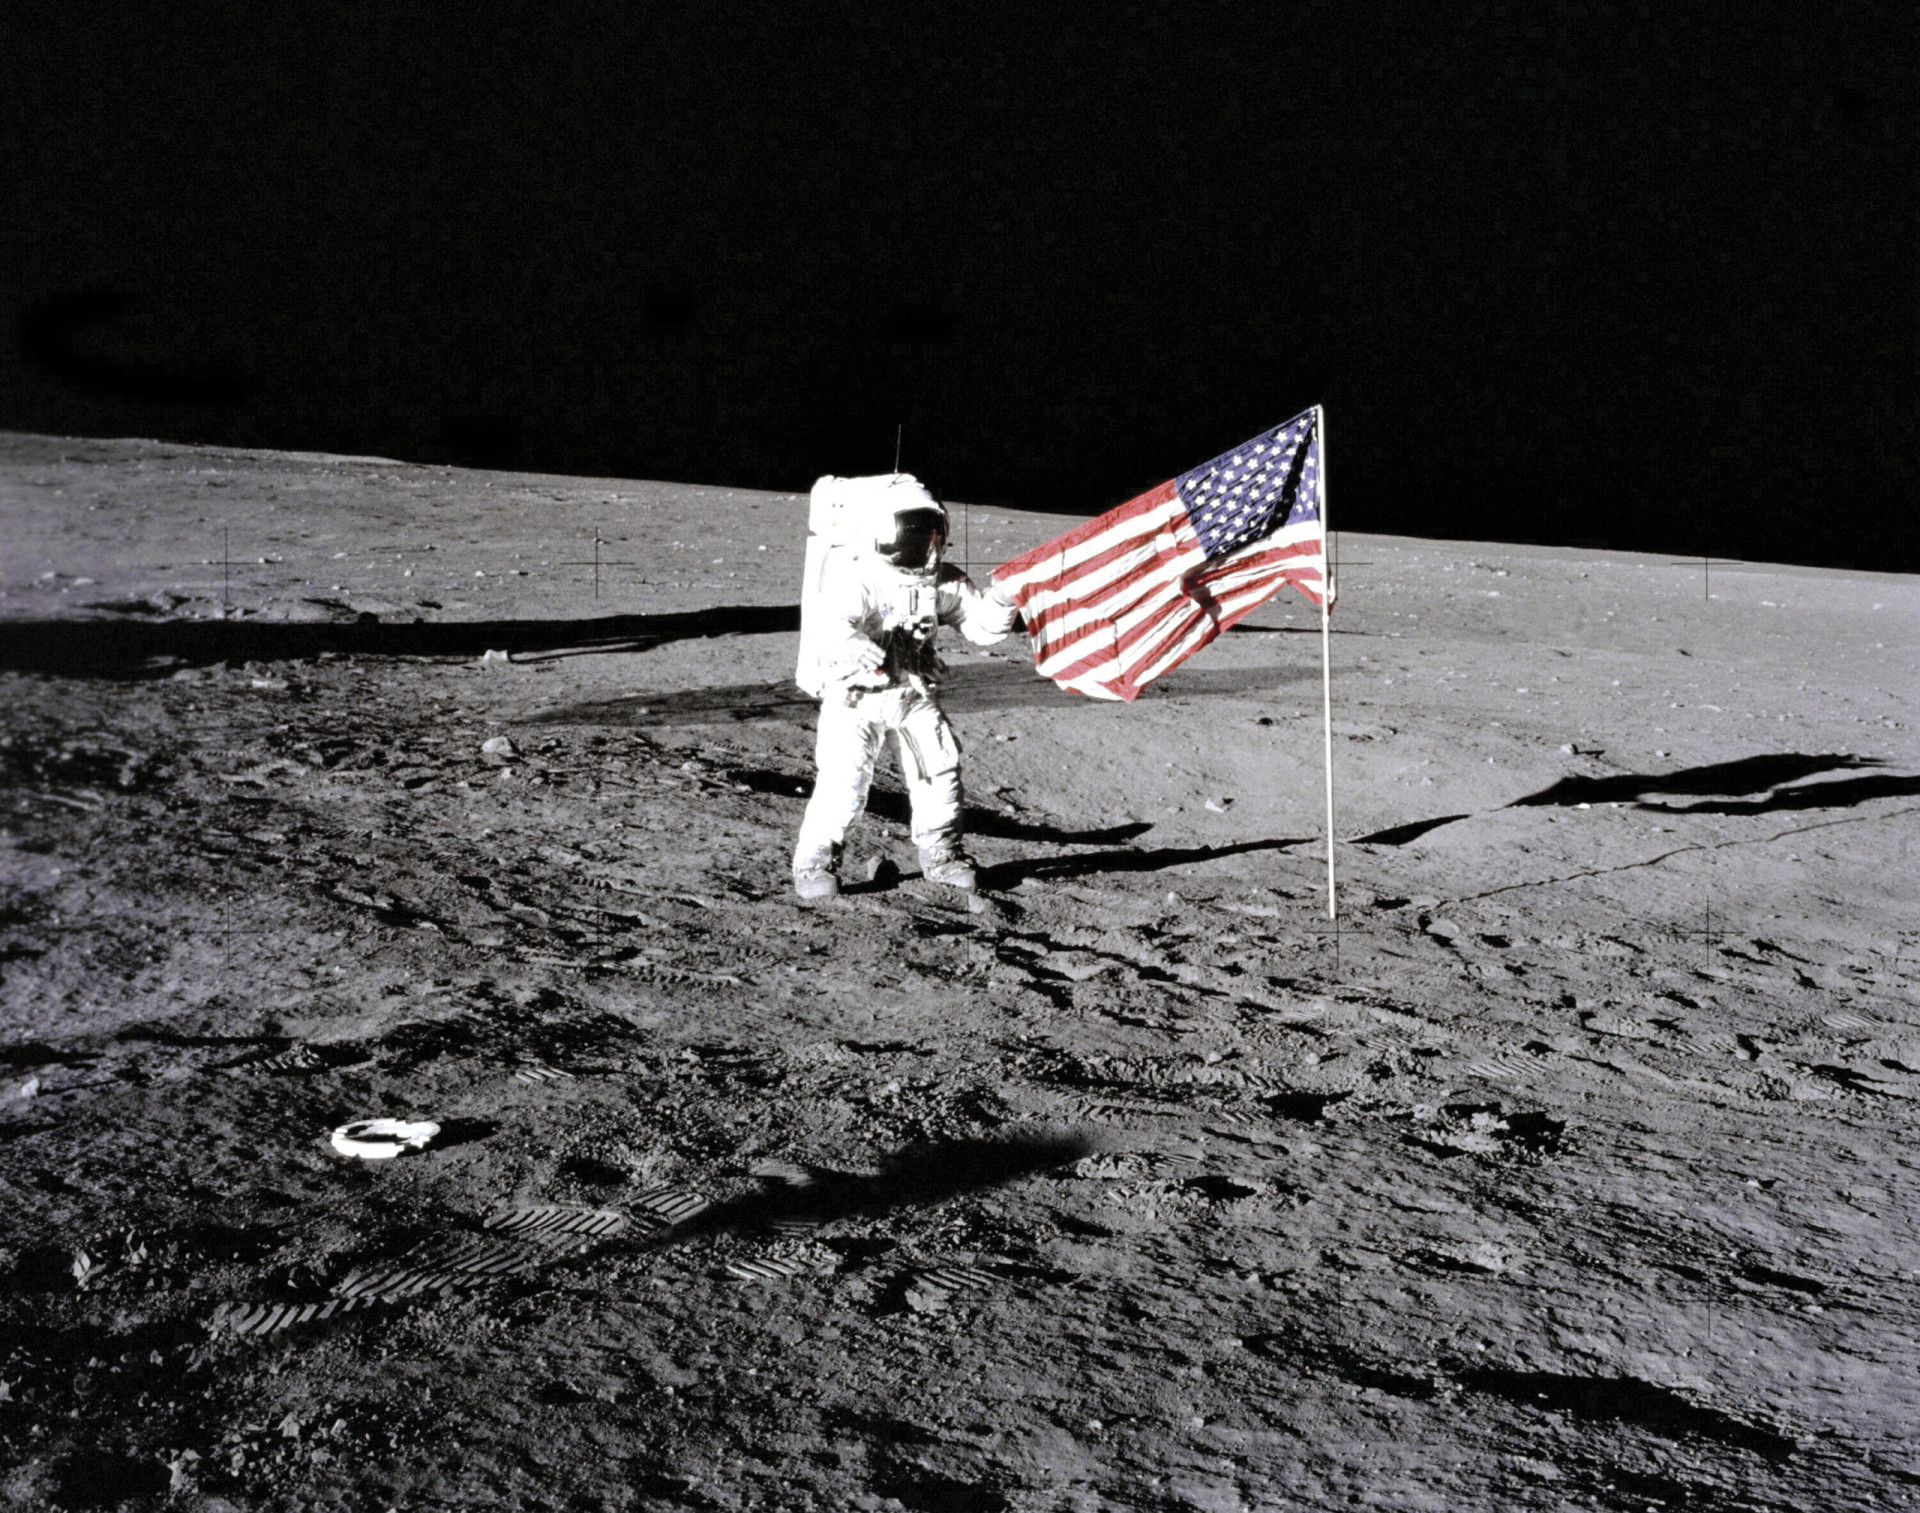 <p>The US focused on winning the Space Race in a much better way: by putting a man on the Moon.</p><p>You may also like:<a href="https://www.starsinsider.com/n/493734?utm_source=msn.com&utm_medium=display&utm_campaign=referral_description&utm_content=713901en-ph"> The brutal ways Jesus' disciples died</a></p>